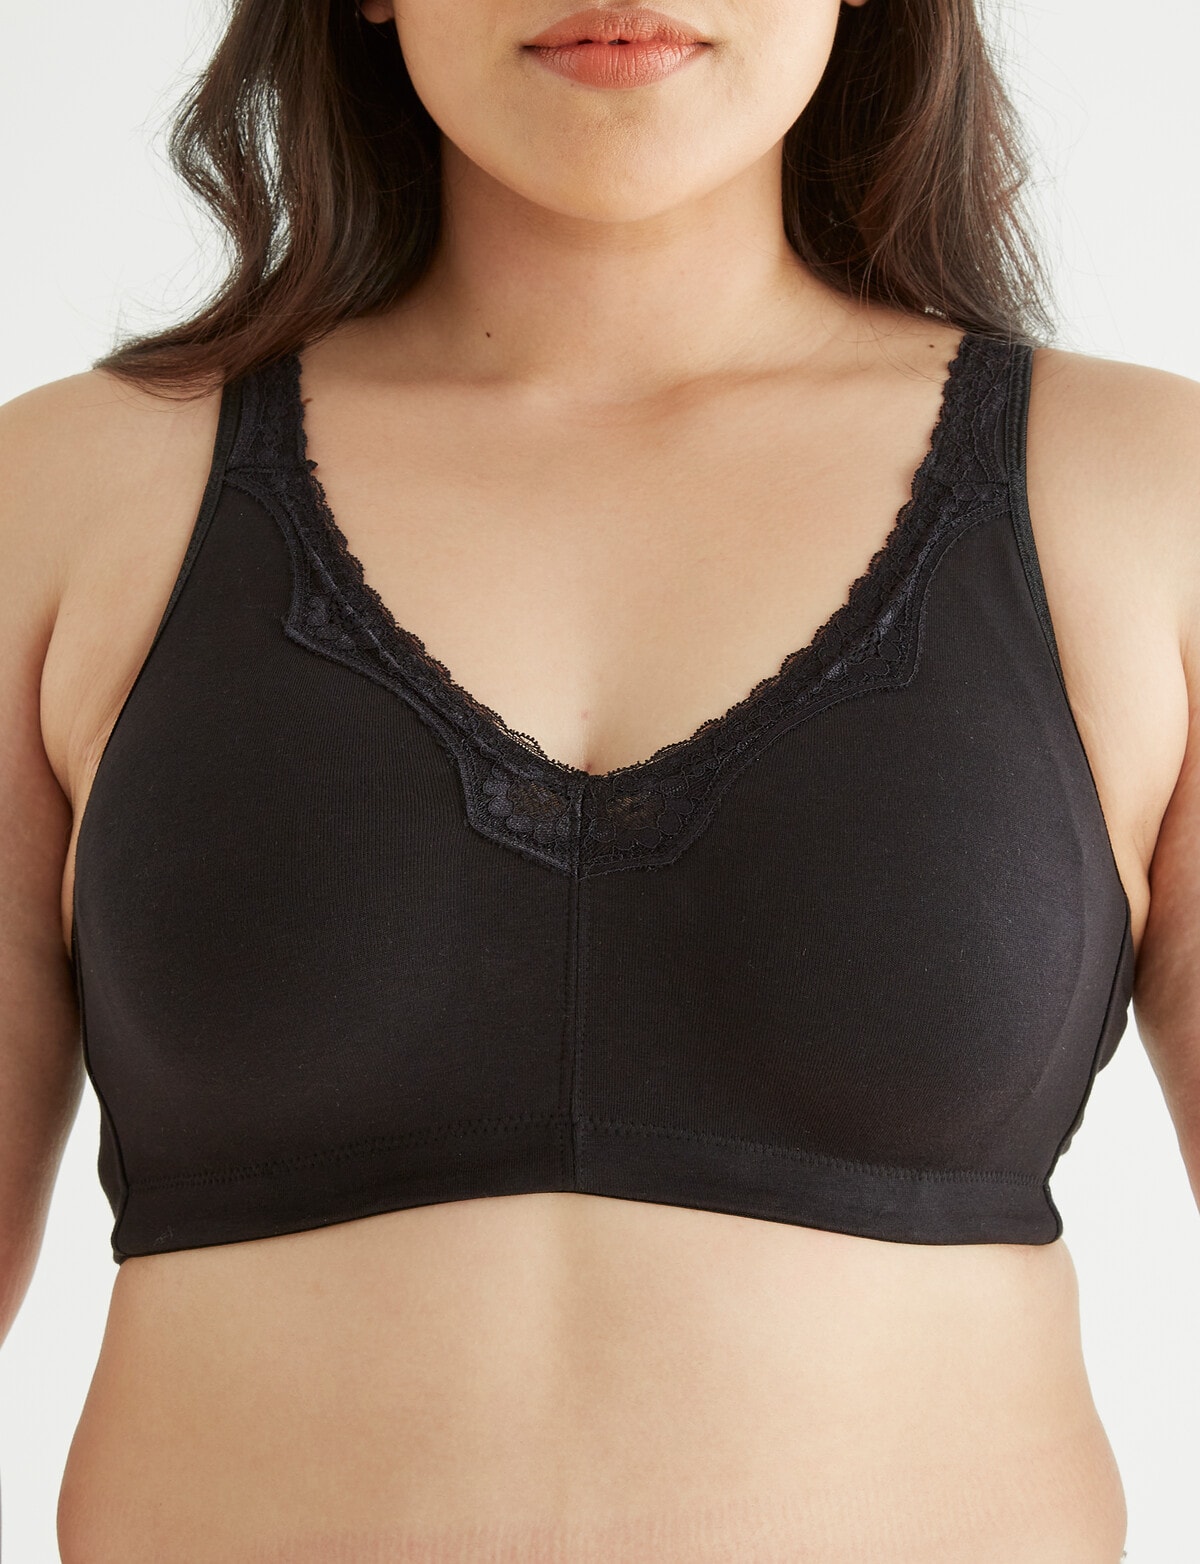 An unlined everyday bra from Bestform is ready for you to try!⁠ ⁠ Size  Range: 12-20 and B-DD⁠ Colours: Sand, Black, White⁠ ⁠